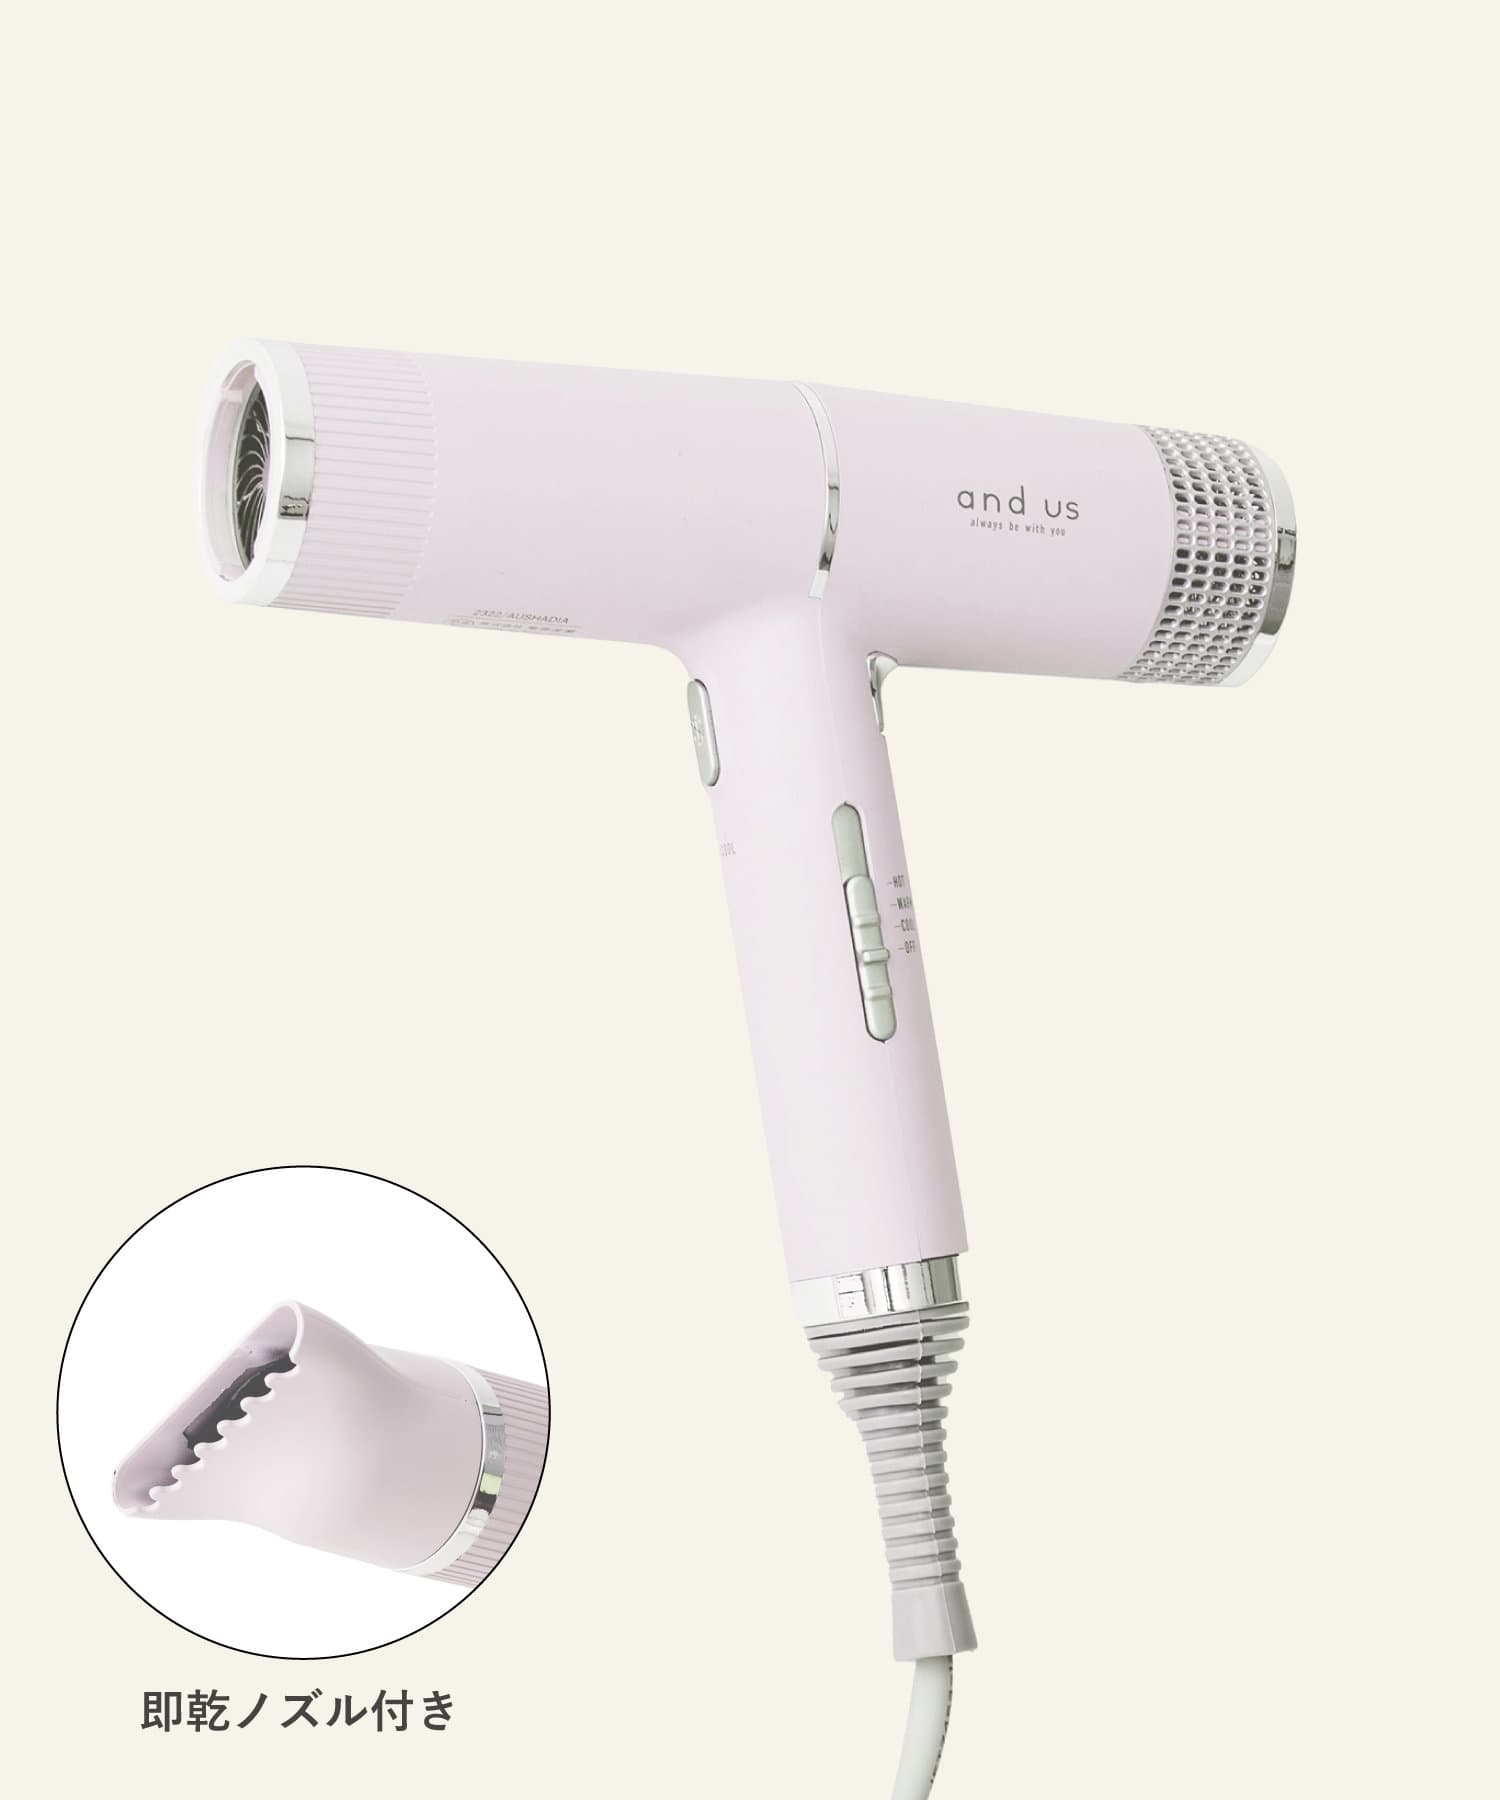 3coins 「and us」SLIM HAIR DRYER - 健康